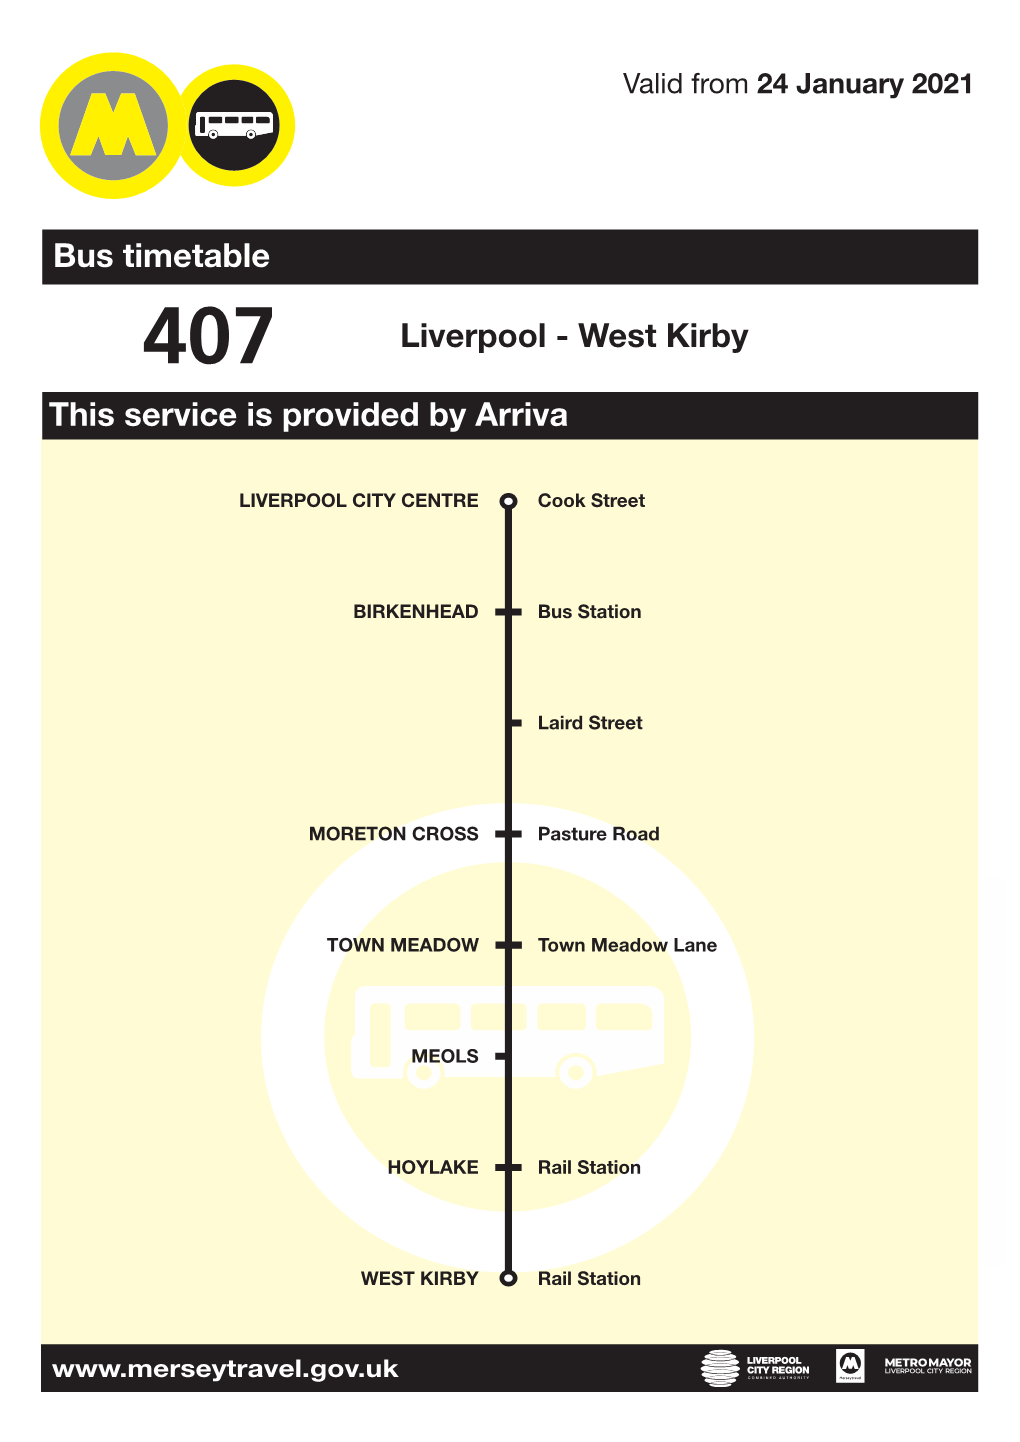 Bus Timetable This Service Is Provided by Arriva